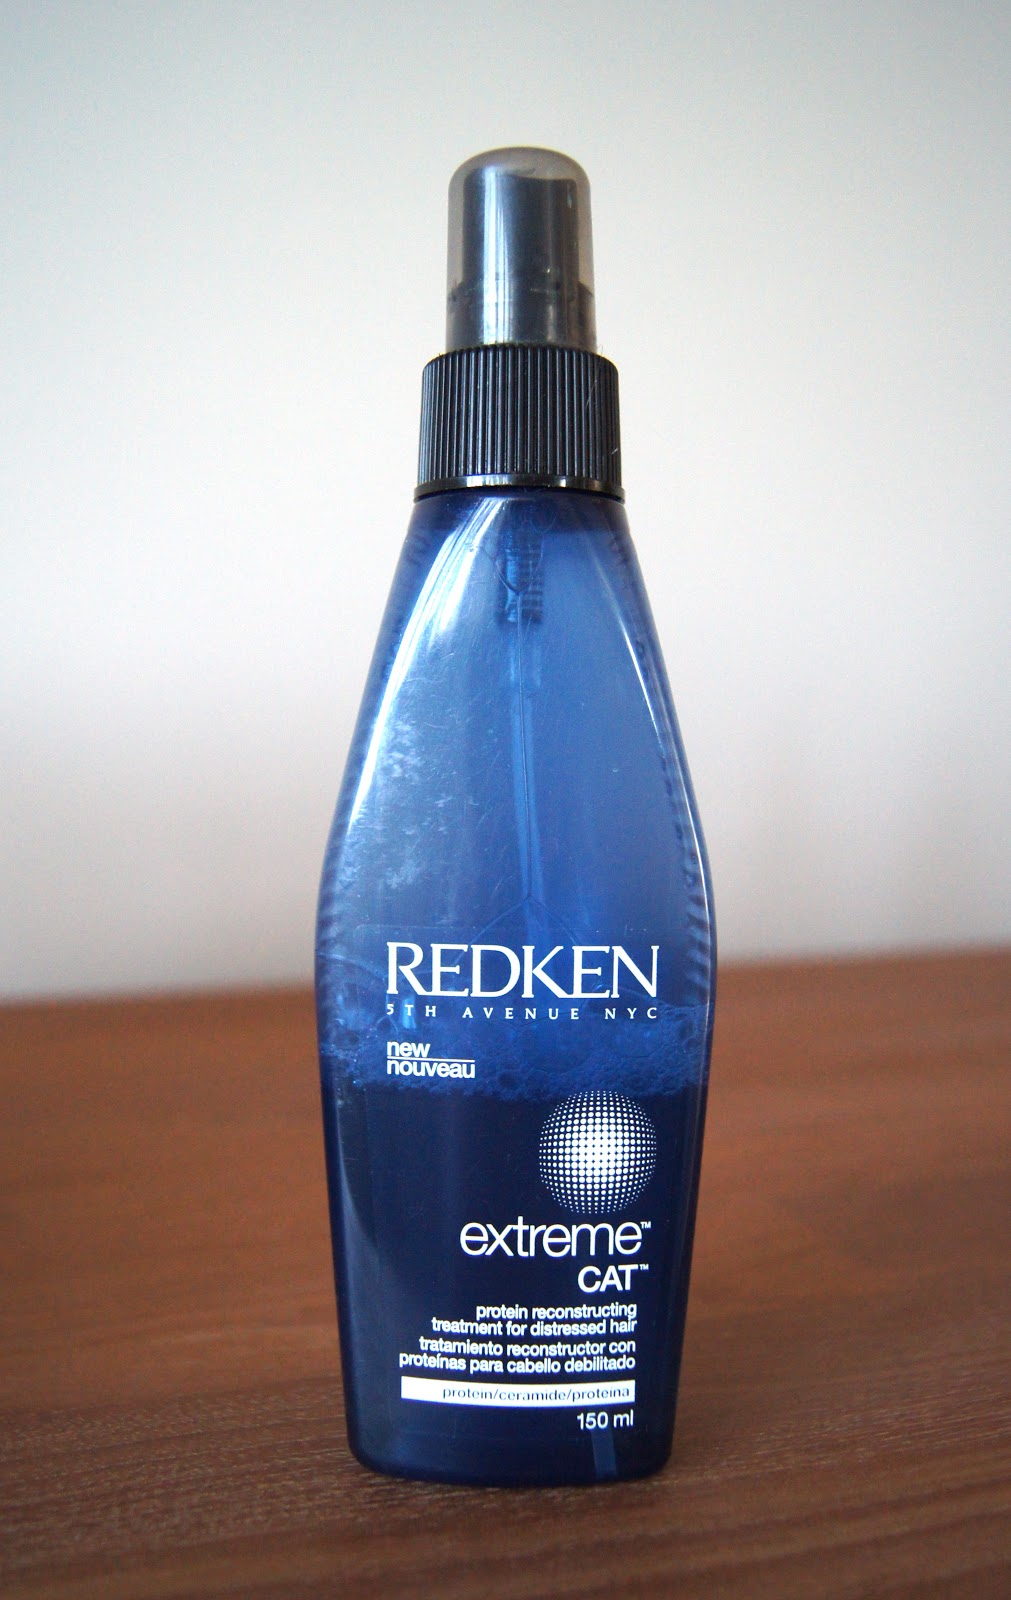  Redken  Extreme CAT  Protein Reconstructing Treatment Review 